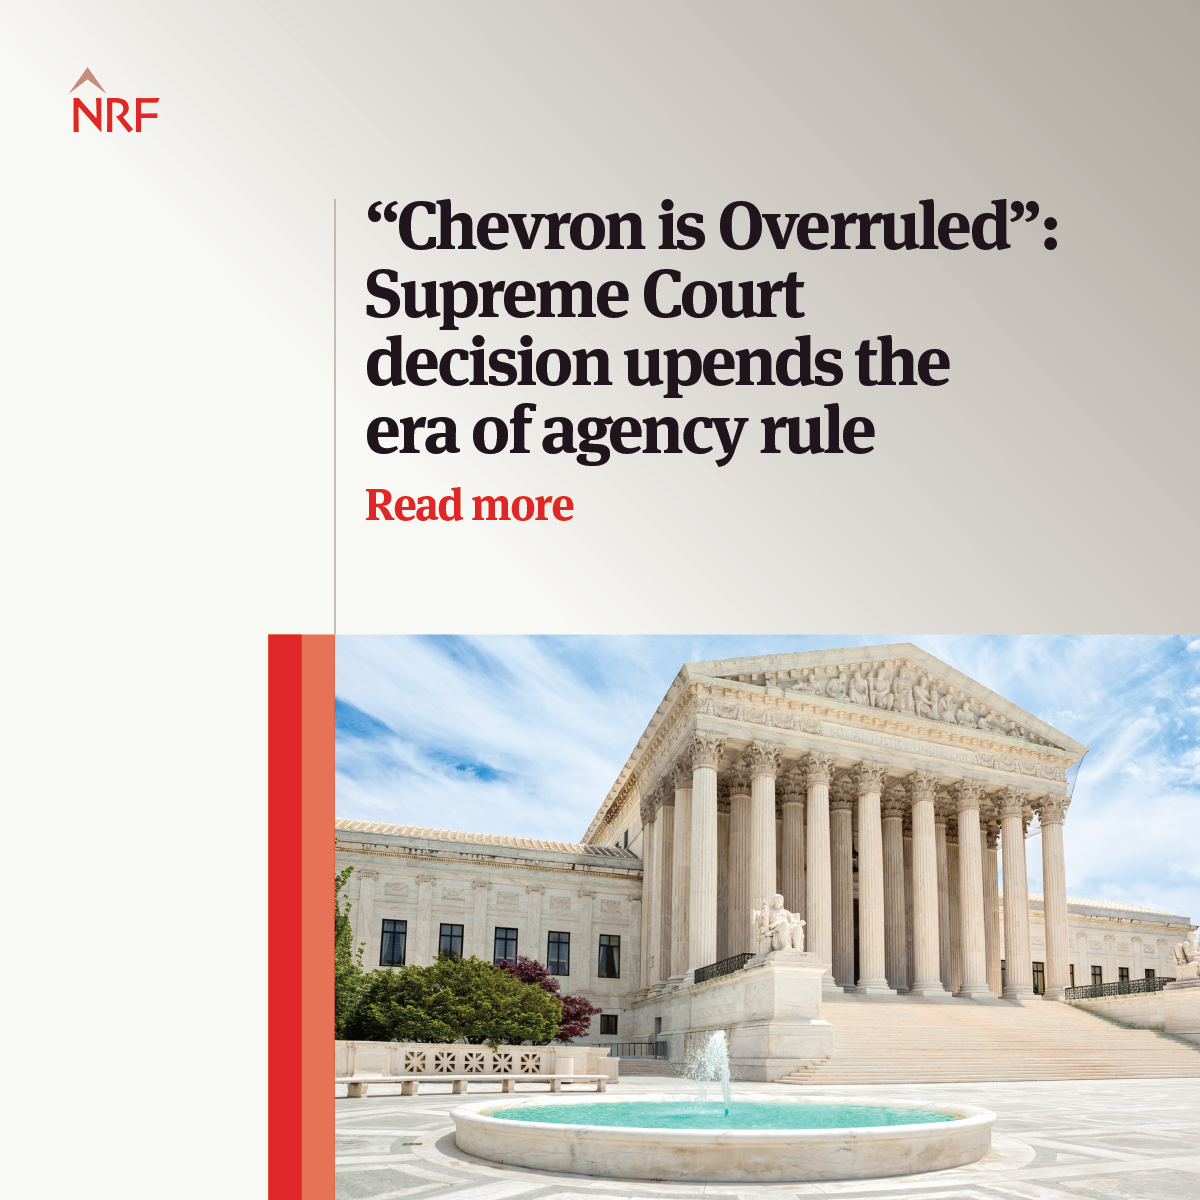 us_59538_social-media-chevron-is-overruled-supreme.png